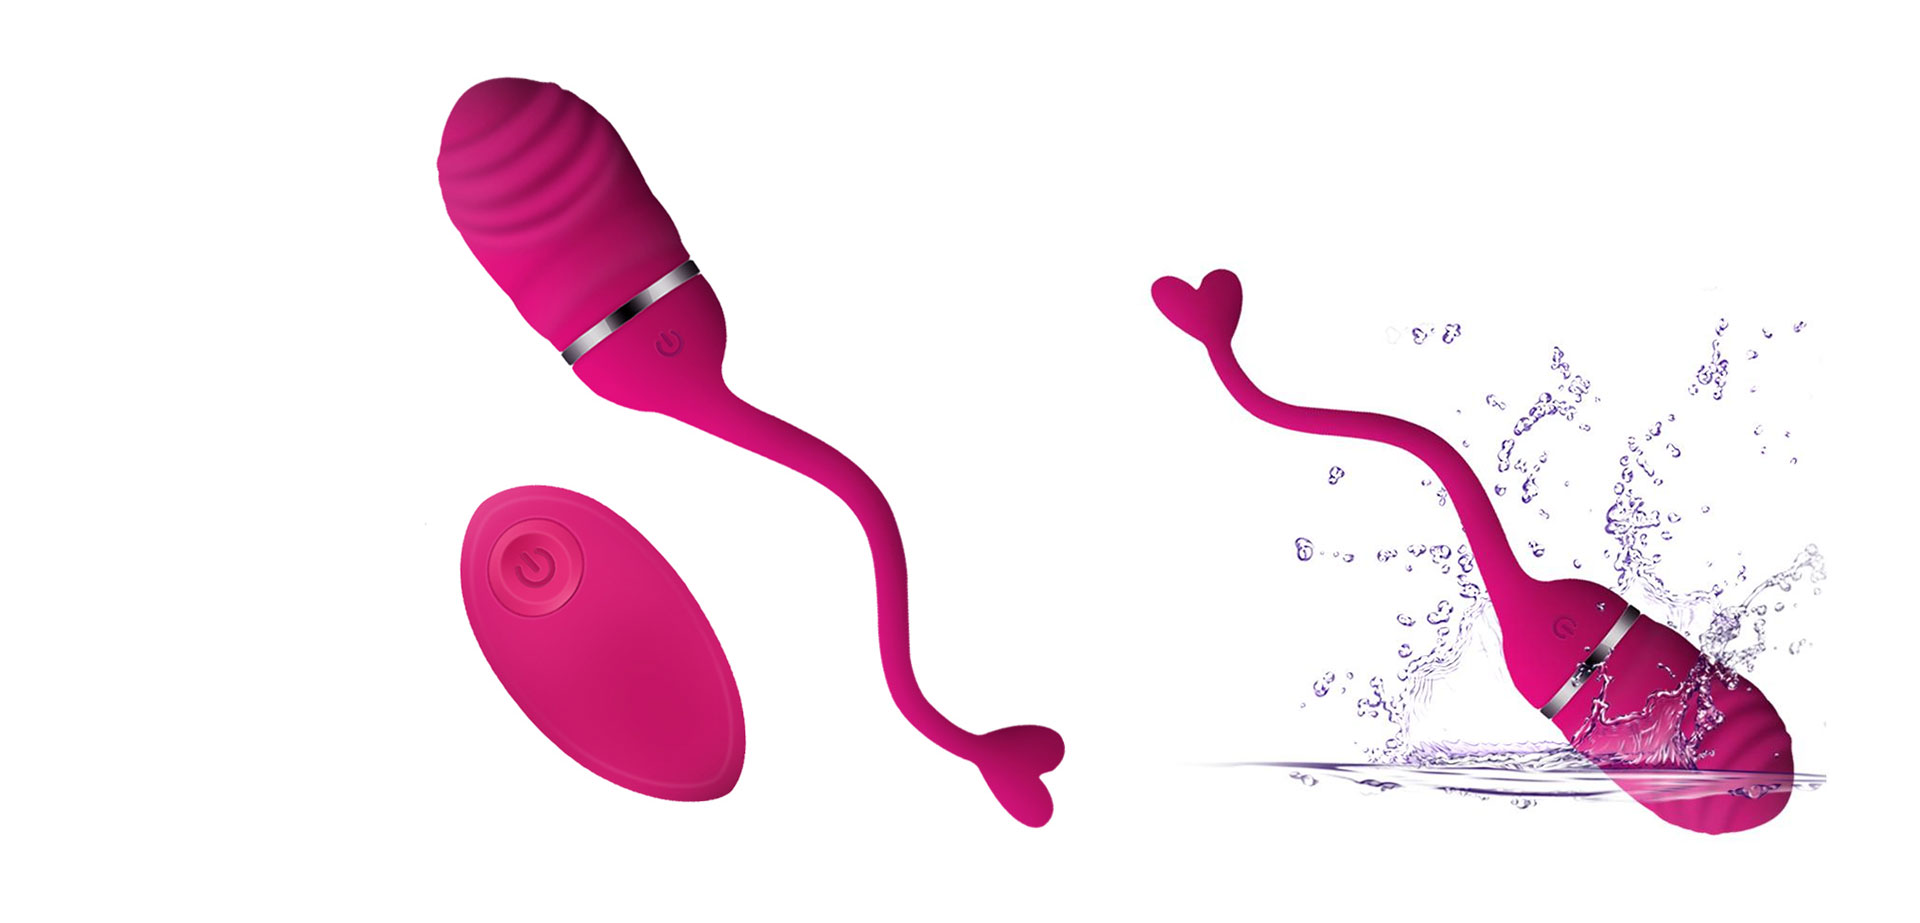 Waterproof remote controlled egg vibrator.